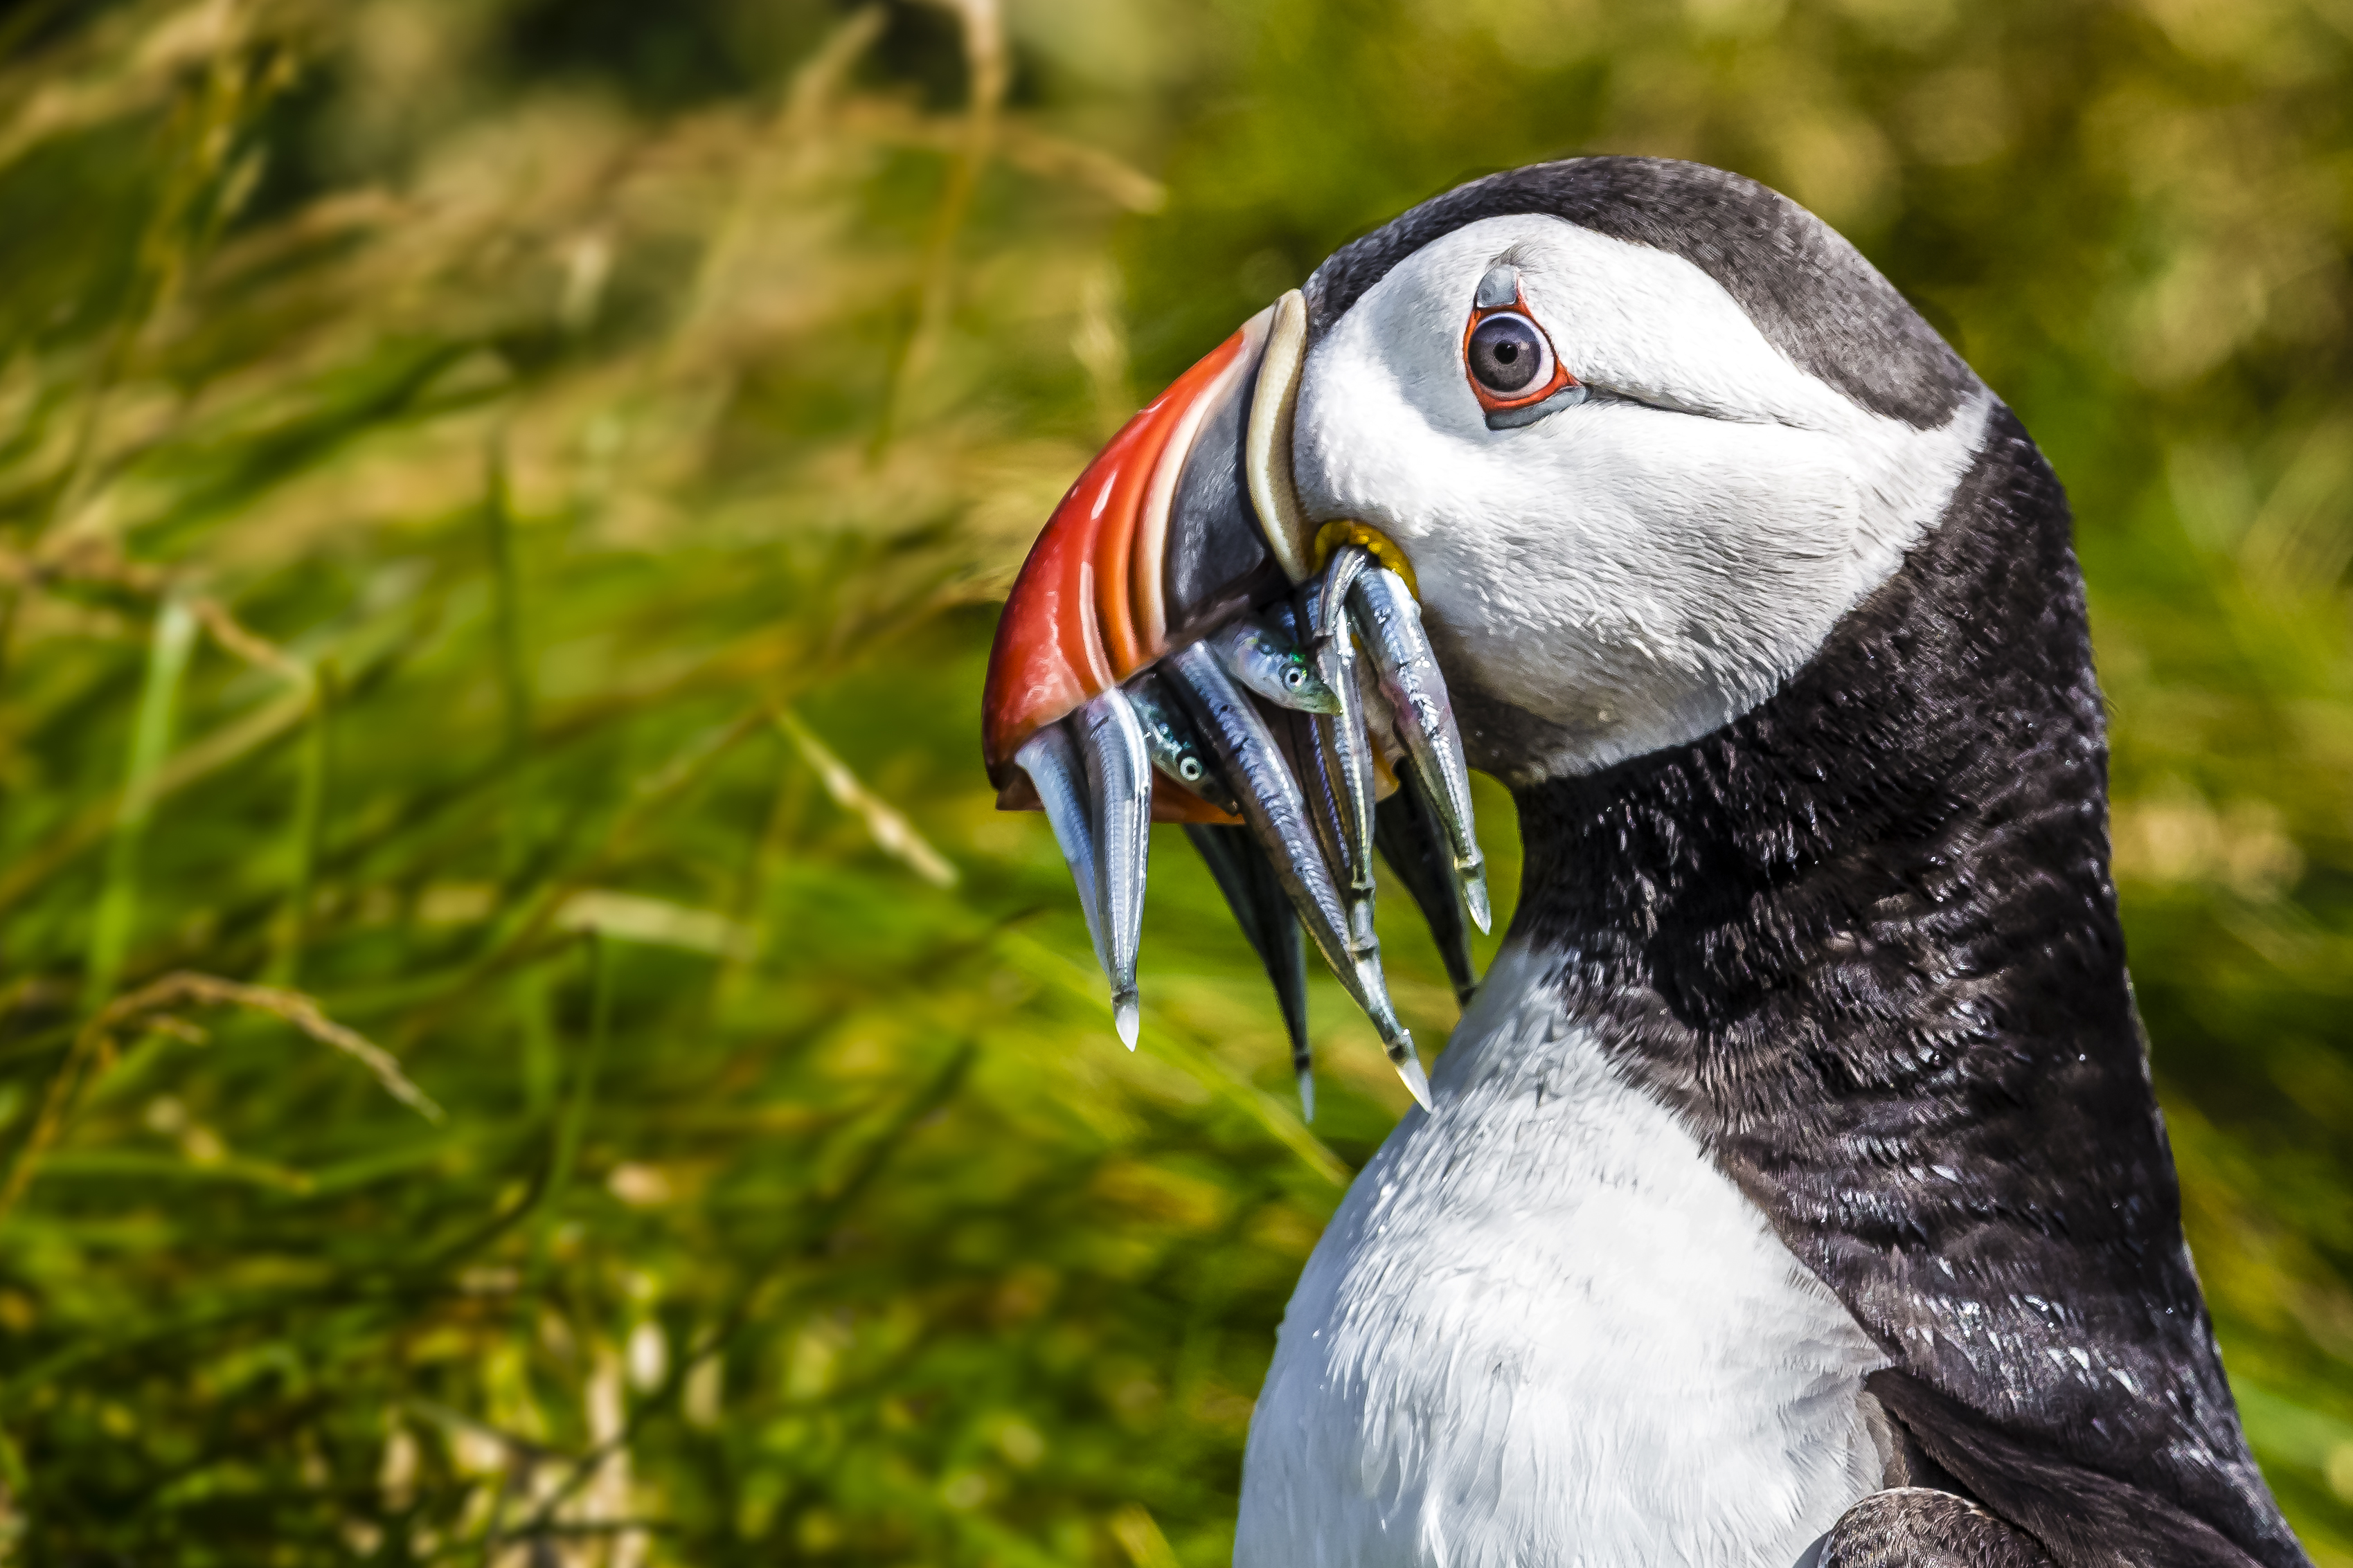 A puffin snacks on sand lance, a small fish that researchers say plays a vital role in the food web.